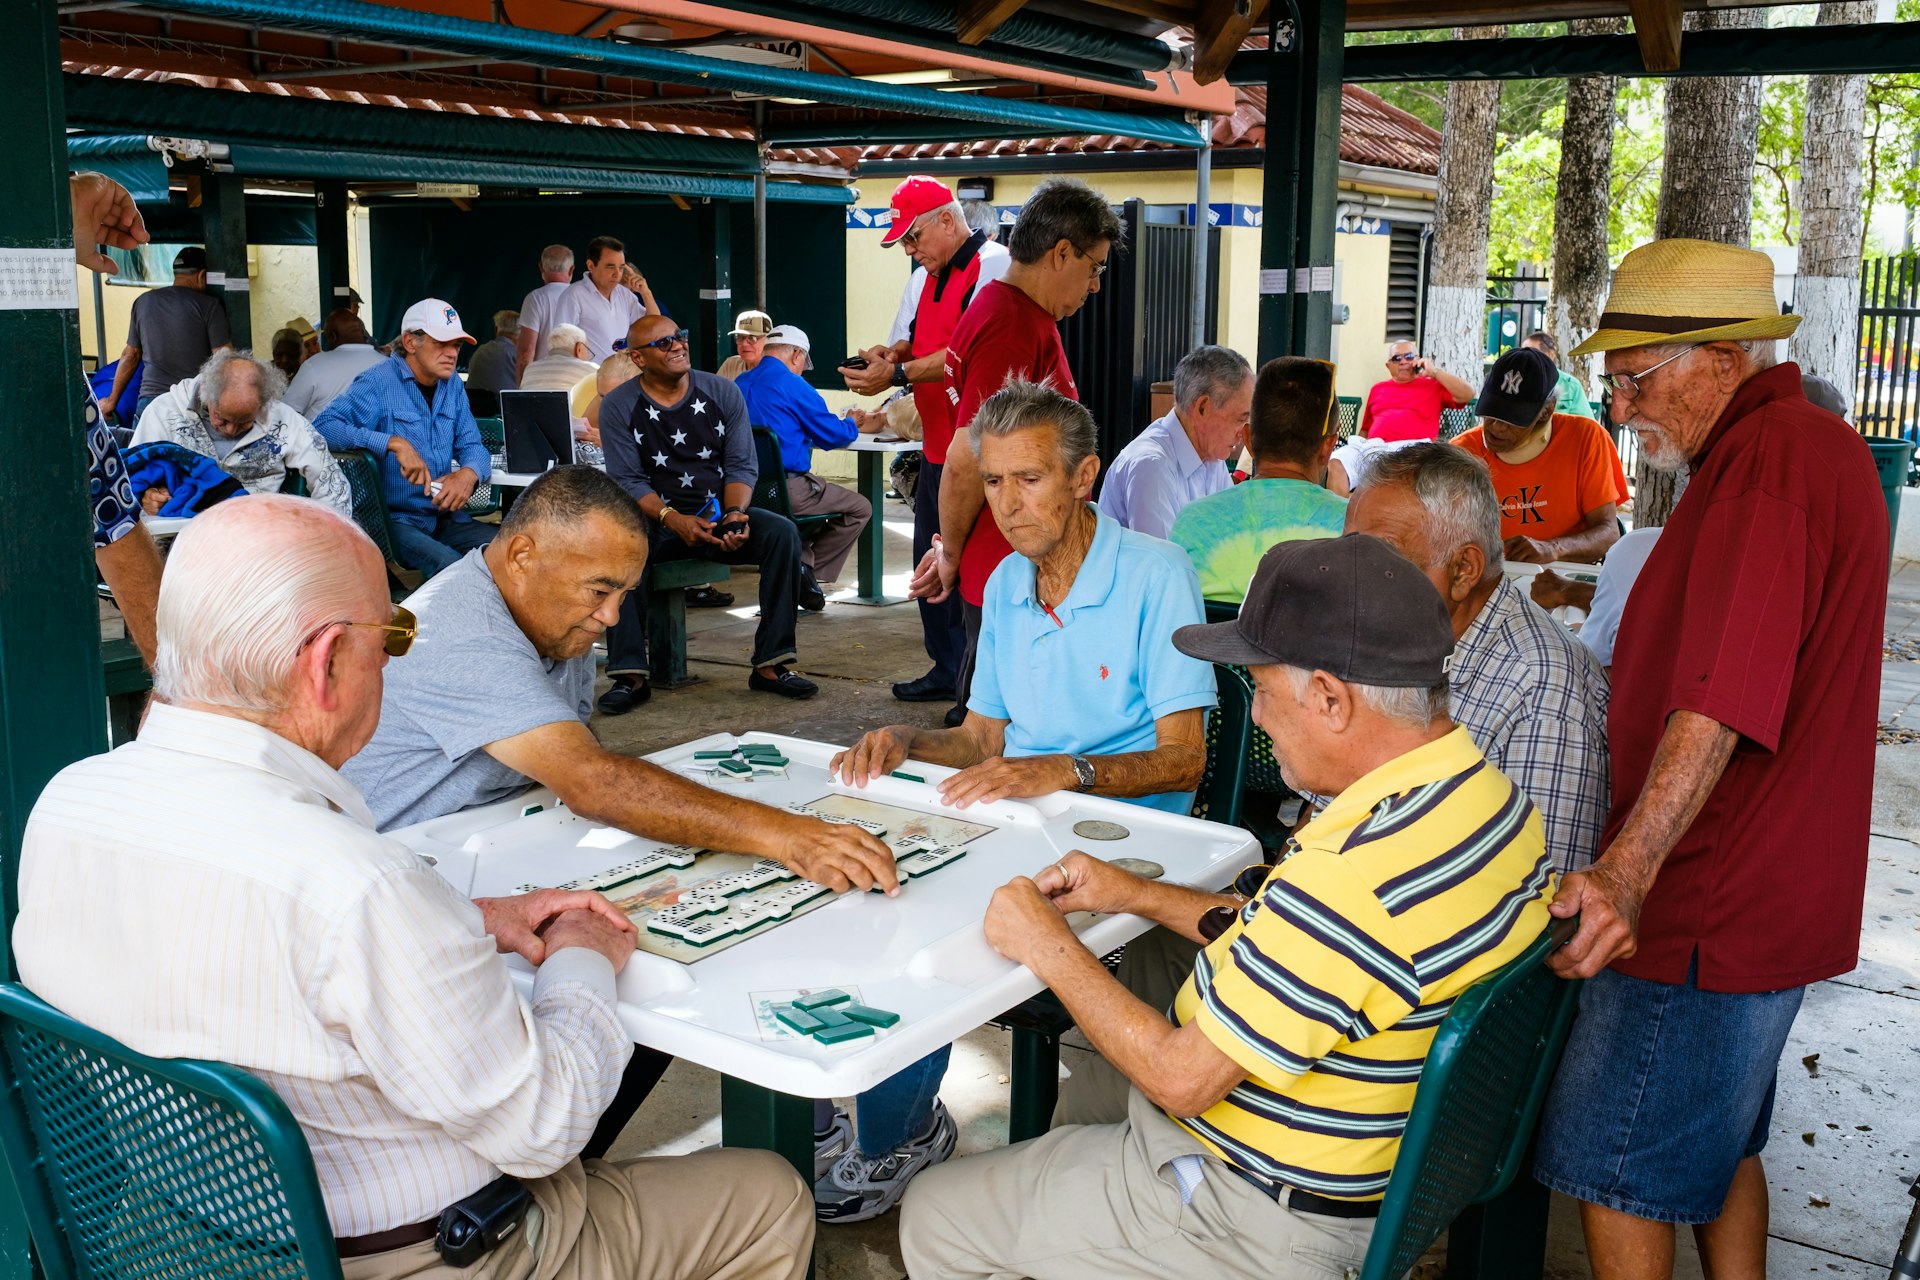  The Domino Park is a popular tourist destination in Little Havana to watch the elderly play domino.